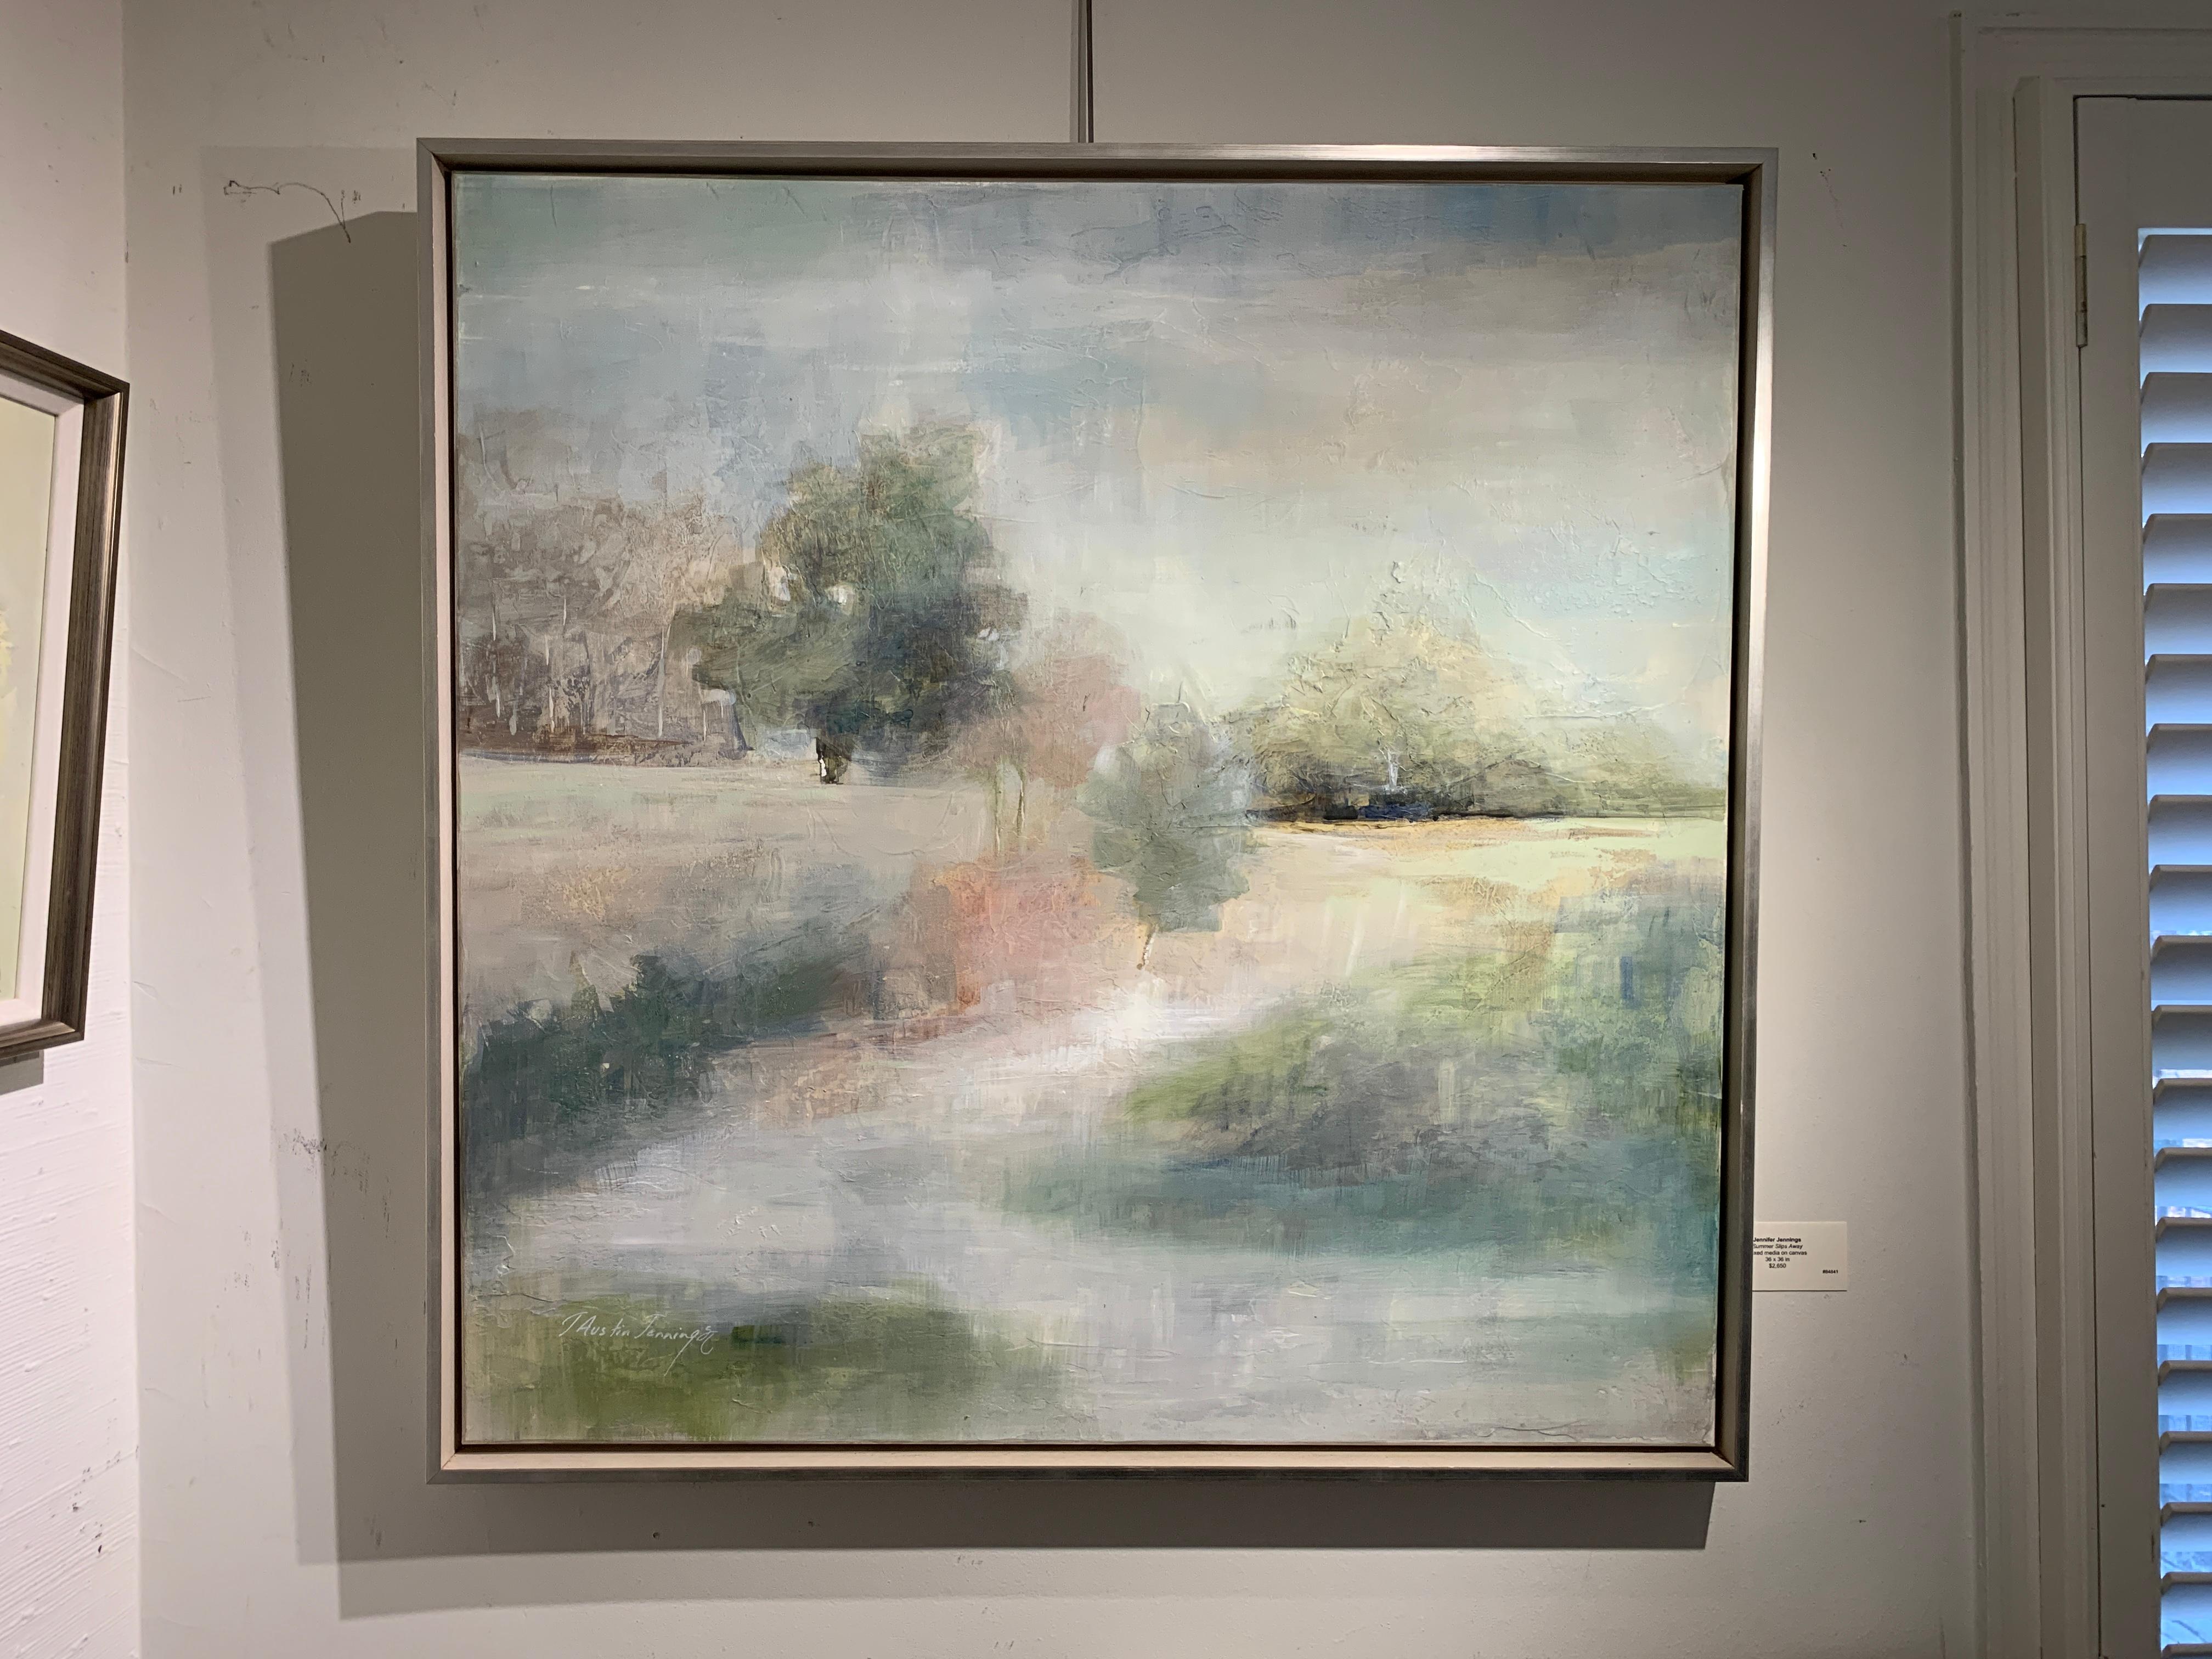 Jennifer Austin Jennings, a native of Dayton, Ohio has been an exhibiting artist and art educator for more than 25 years. Her close connection with nature provides inspiration for scenic and abstract compositions full of life and movement. 